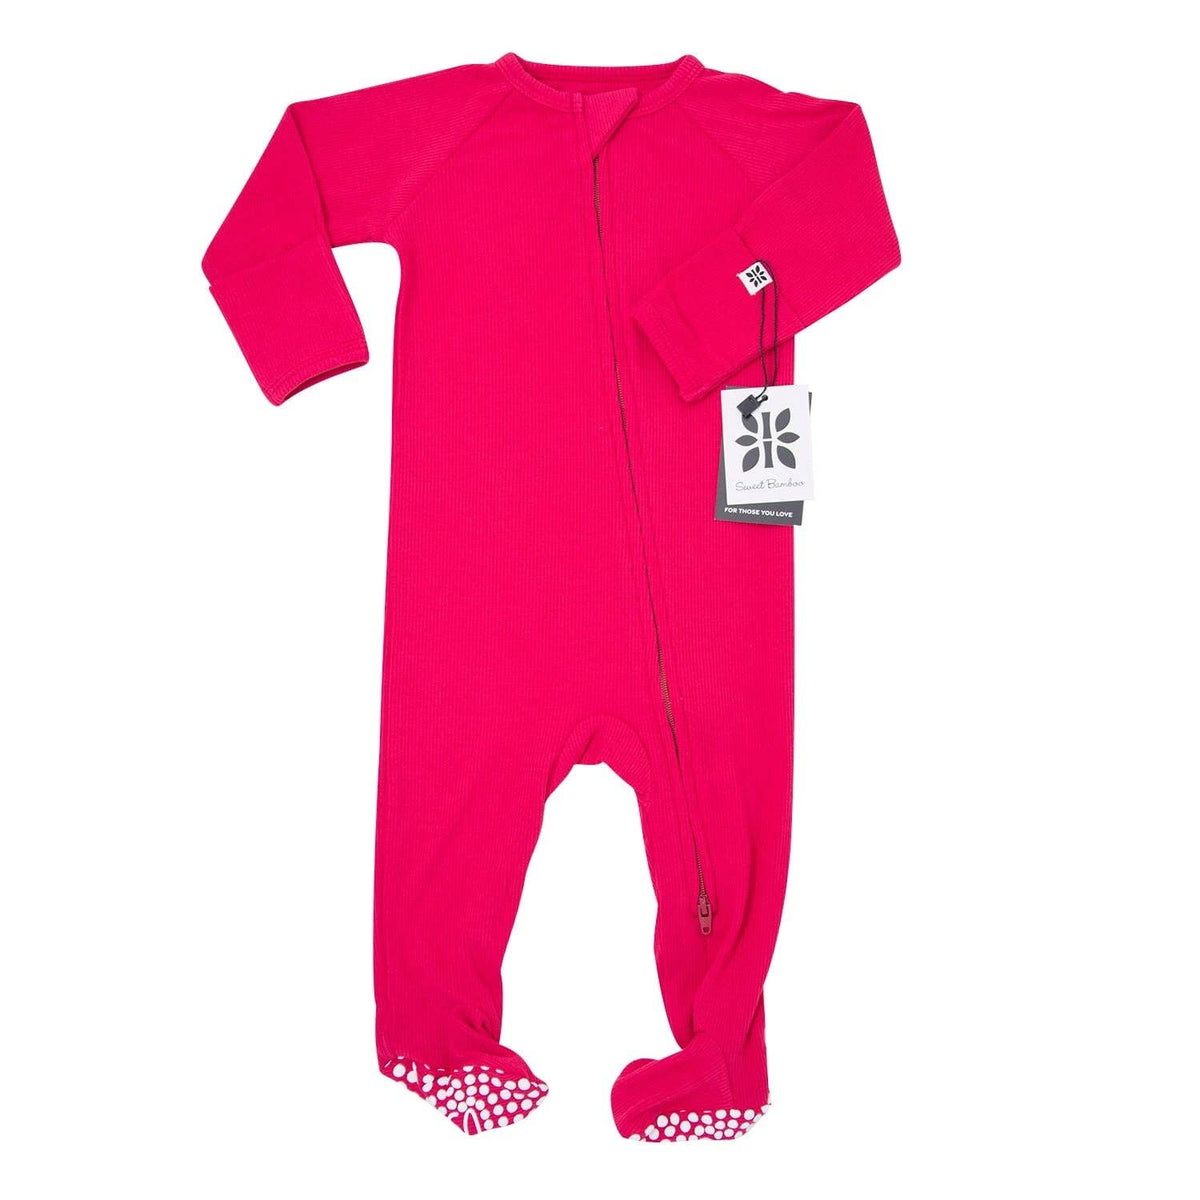 Zipper Footie - Ruby Red Ribbed